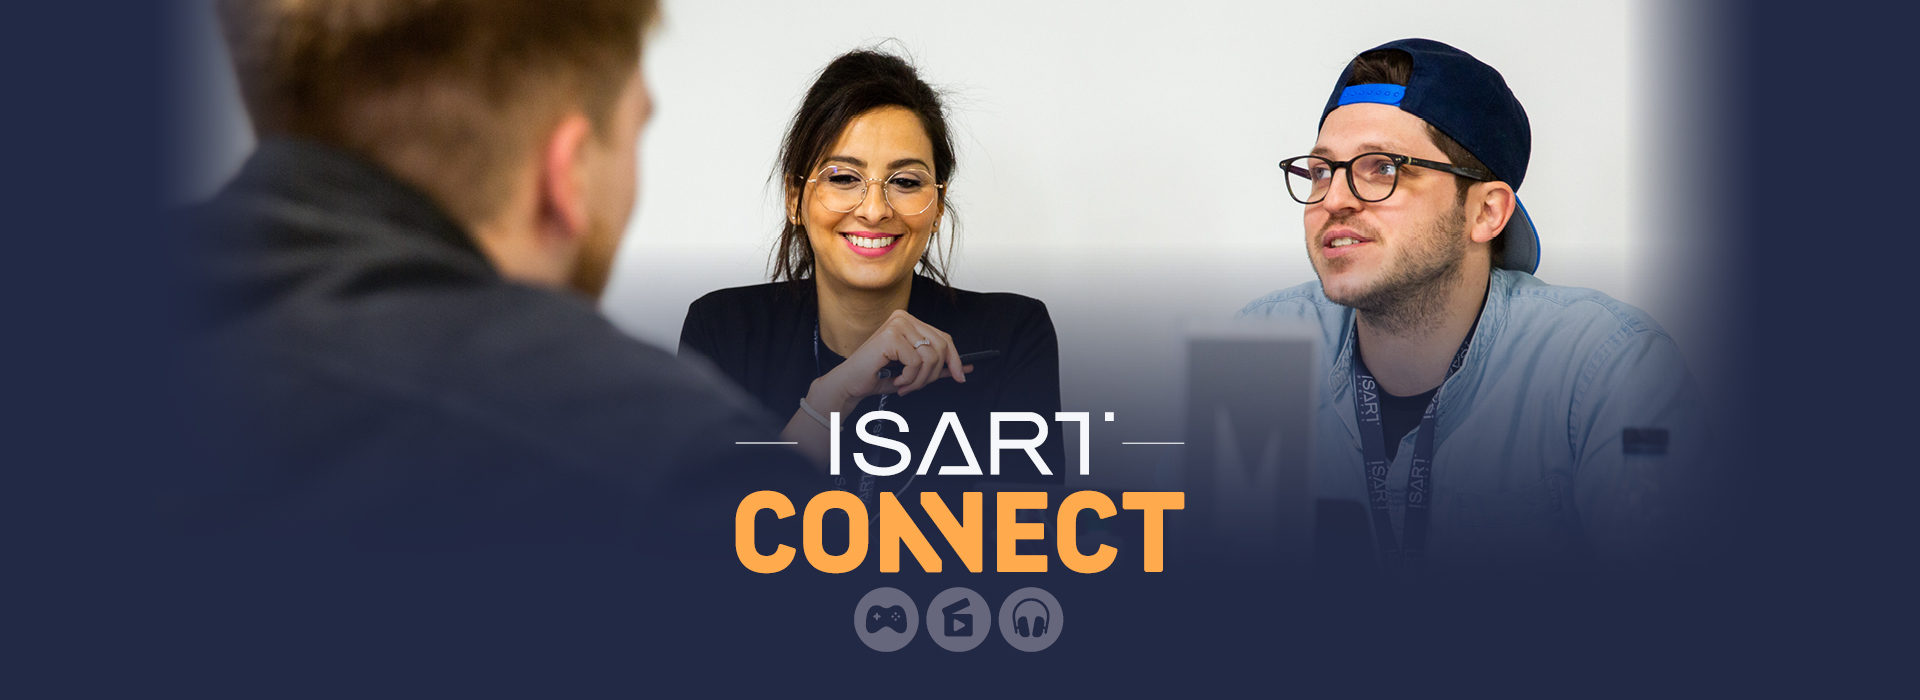 isart connect